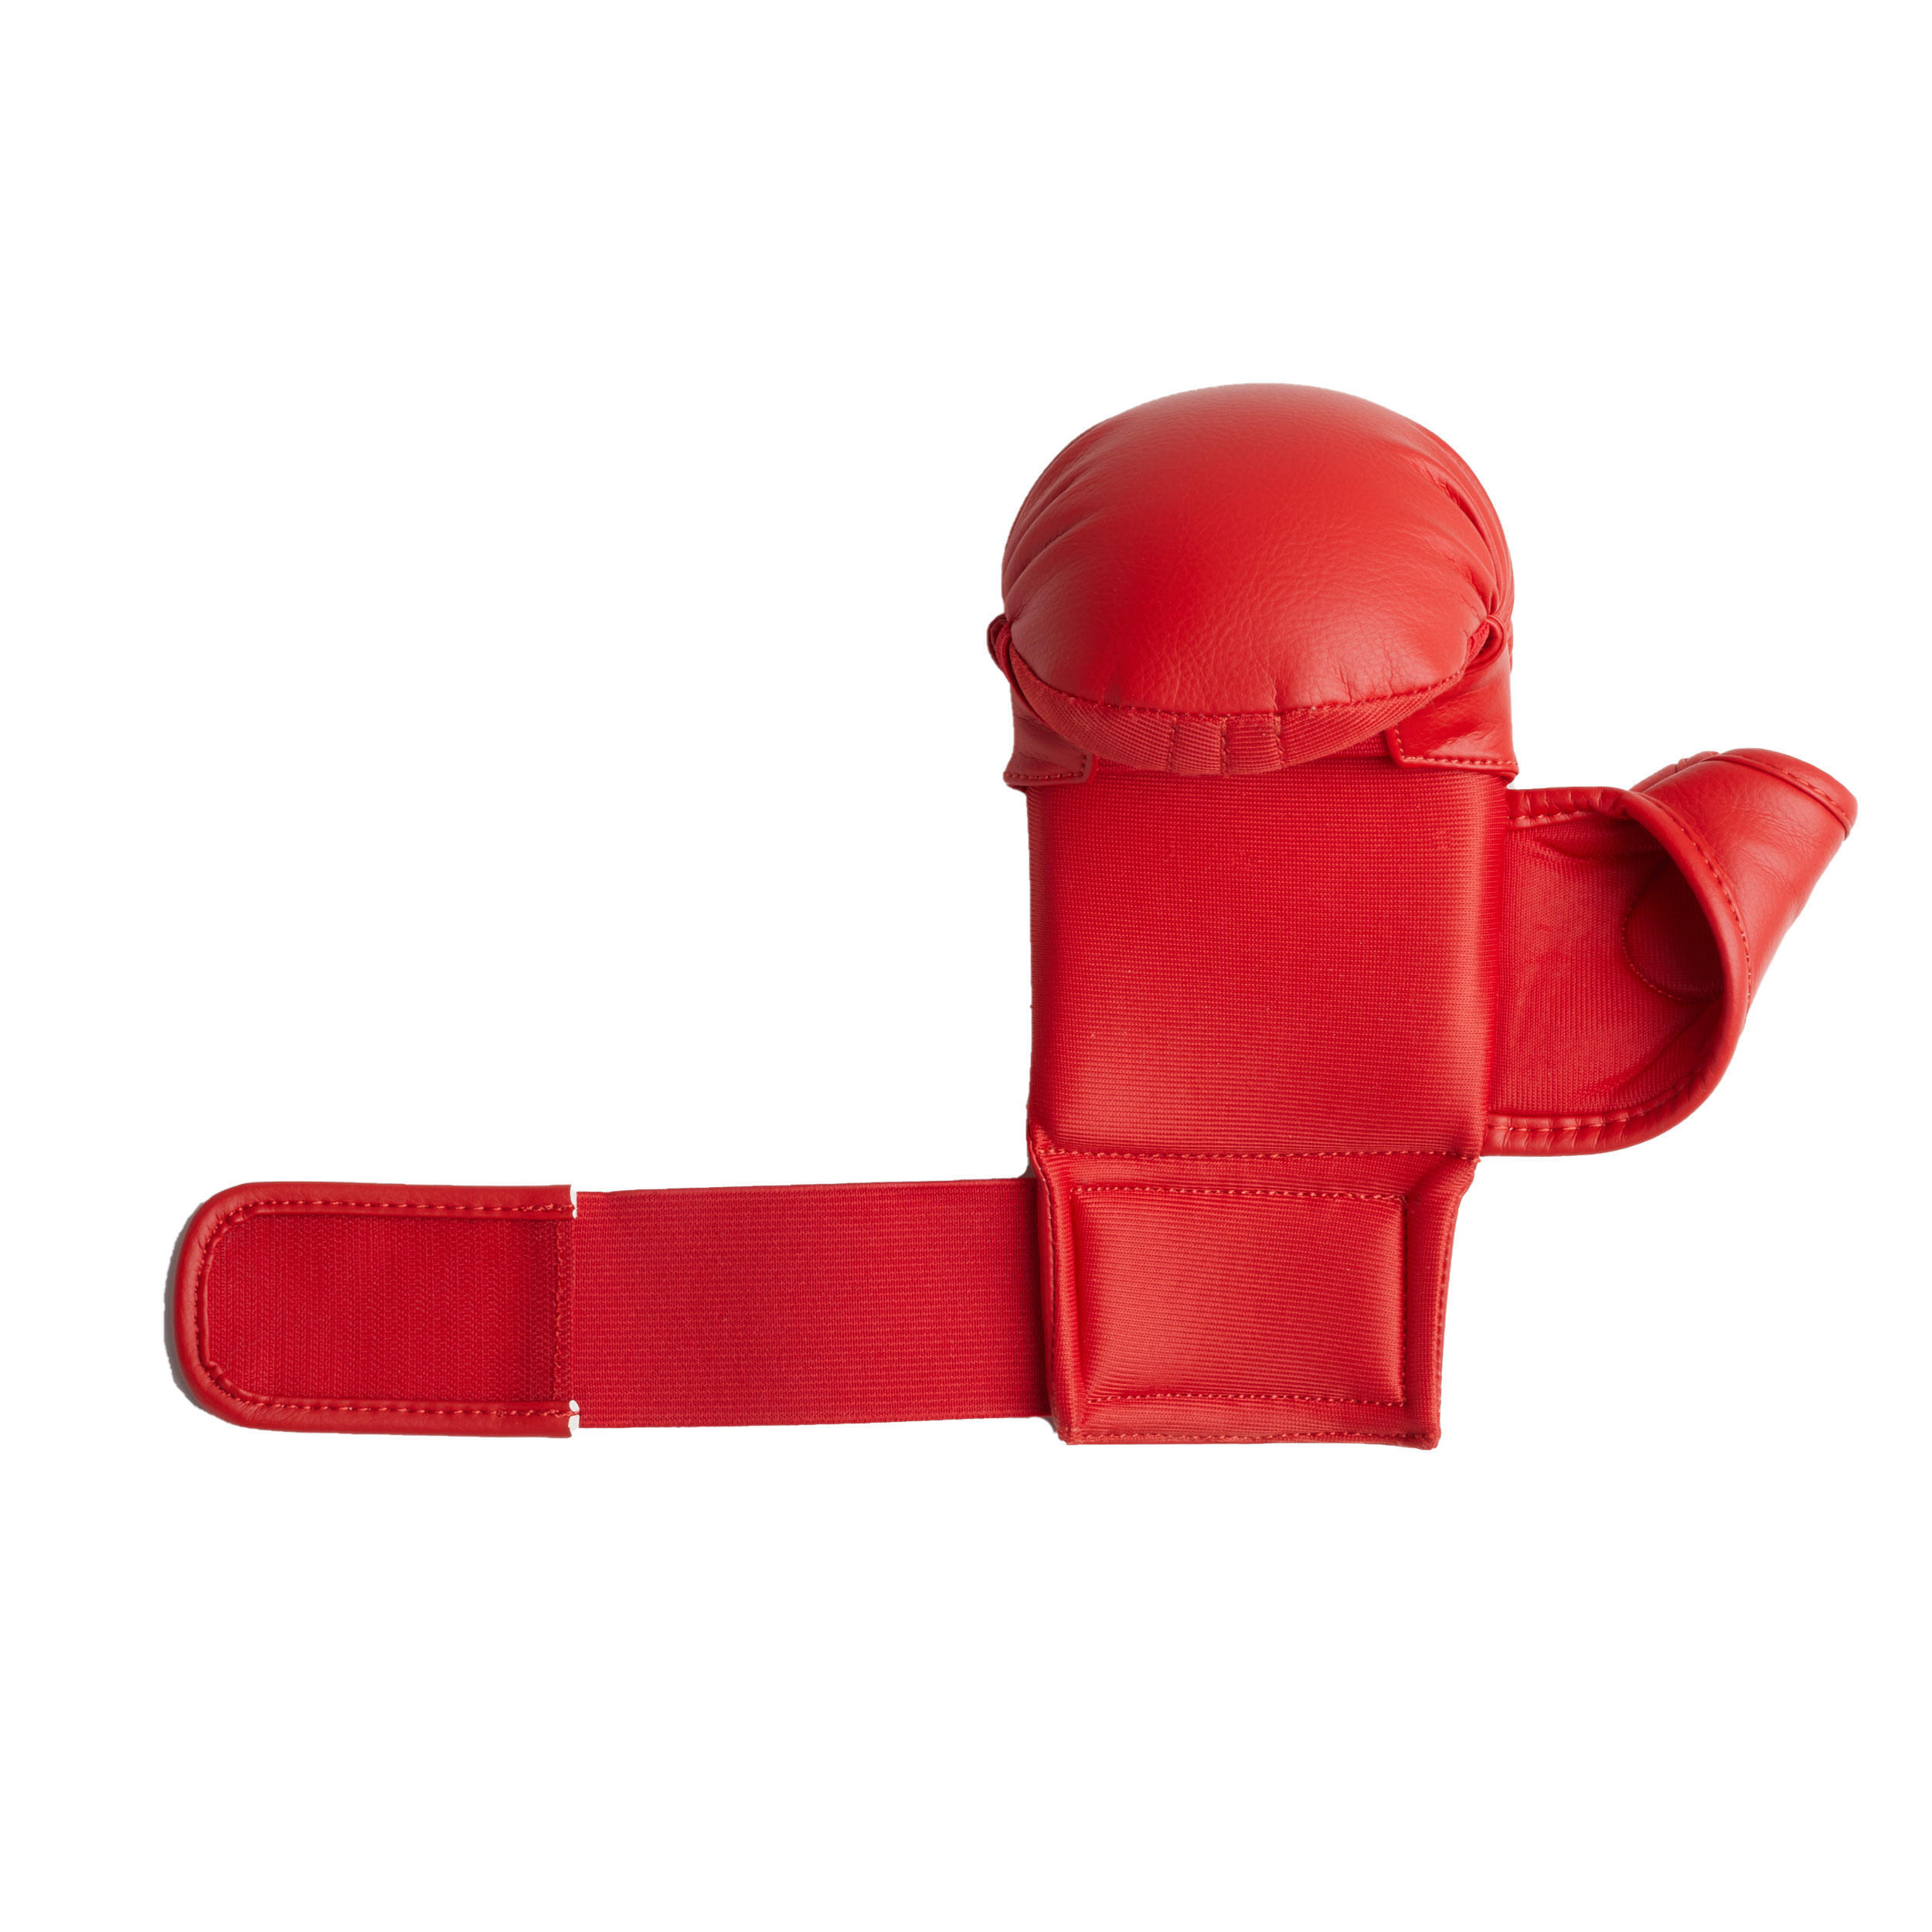 Karate Mitts 900 - Red 4/9